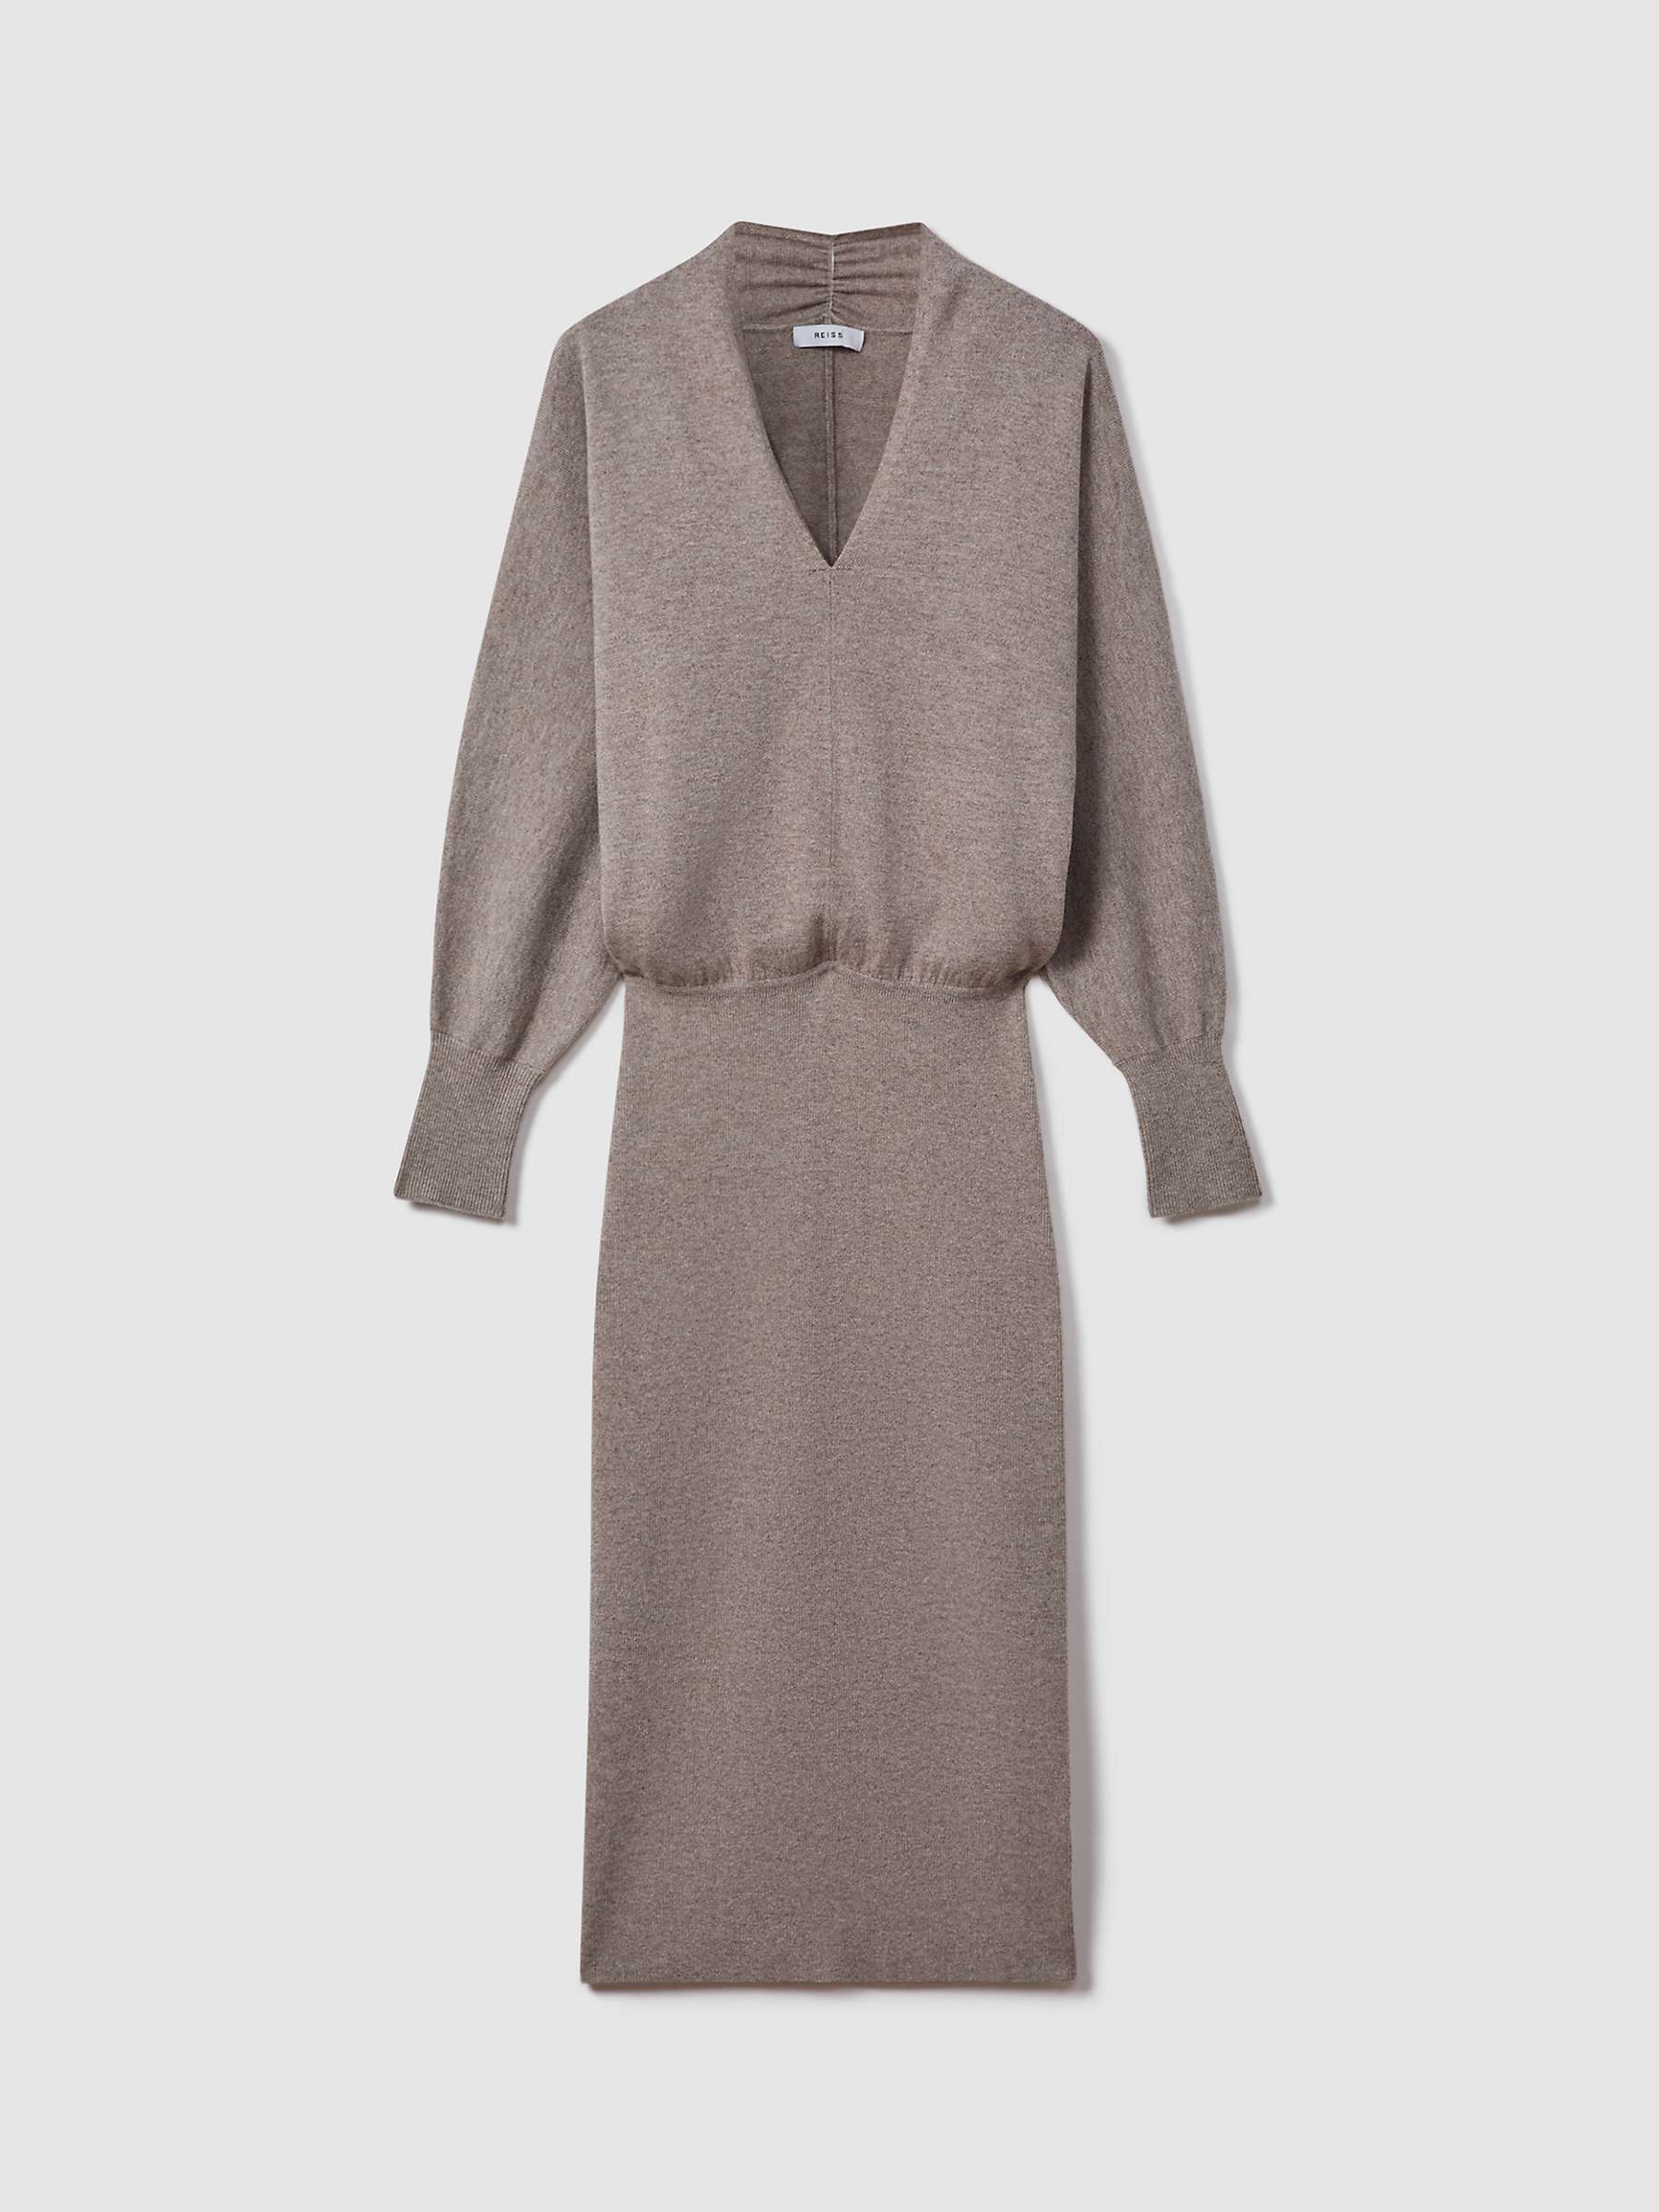 Buy Reiss Sally Wool and Cashmere Jumper Dress Online at johnlewis.com